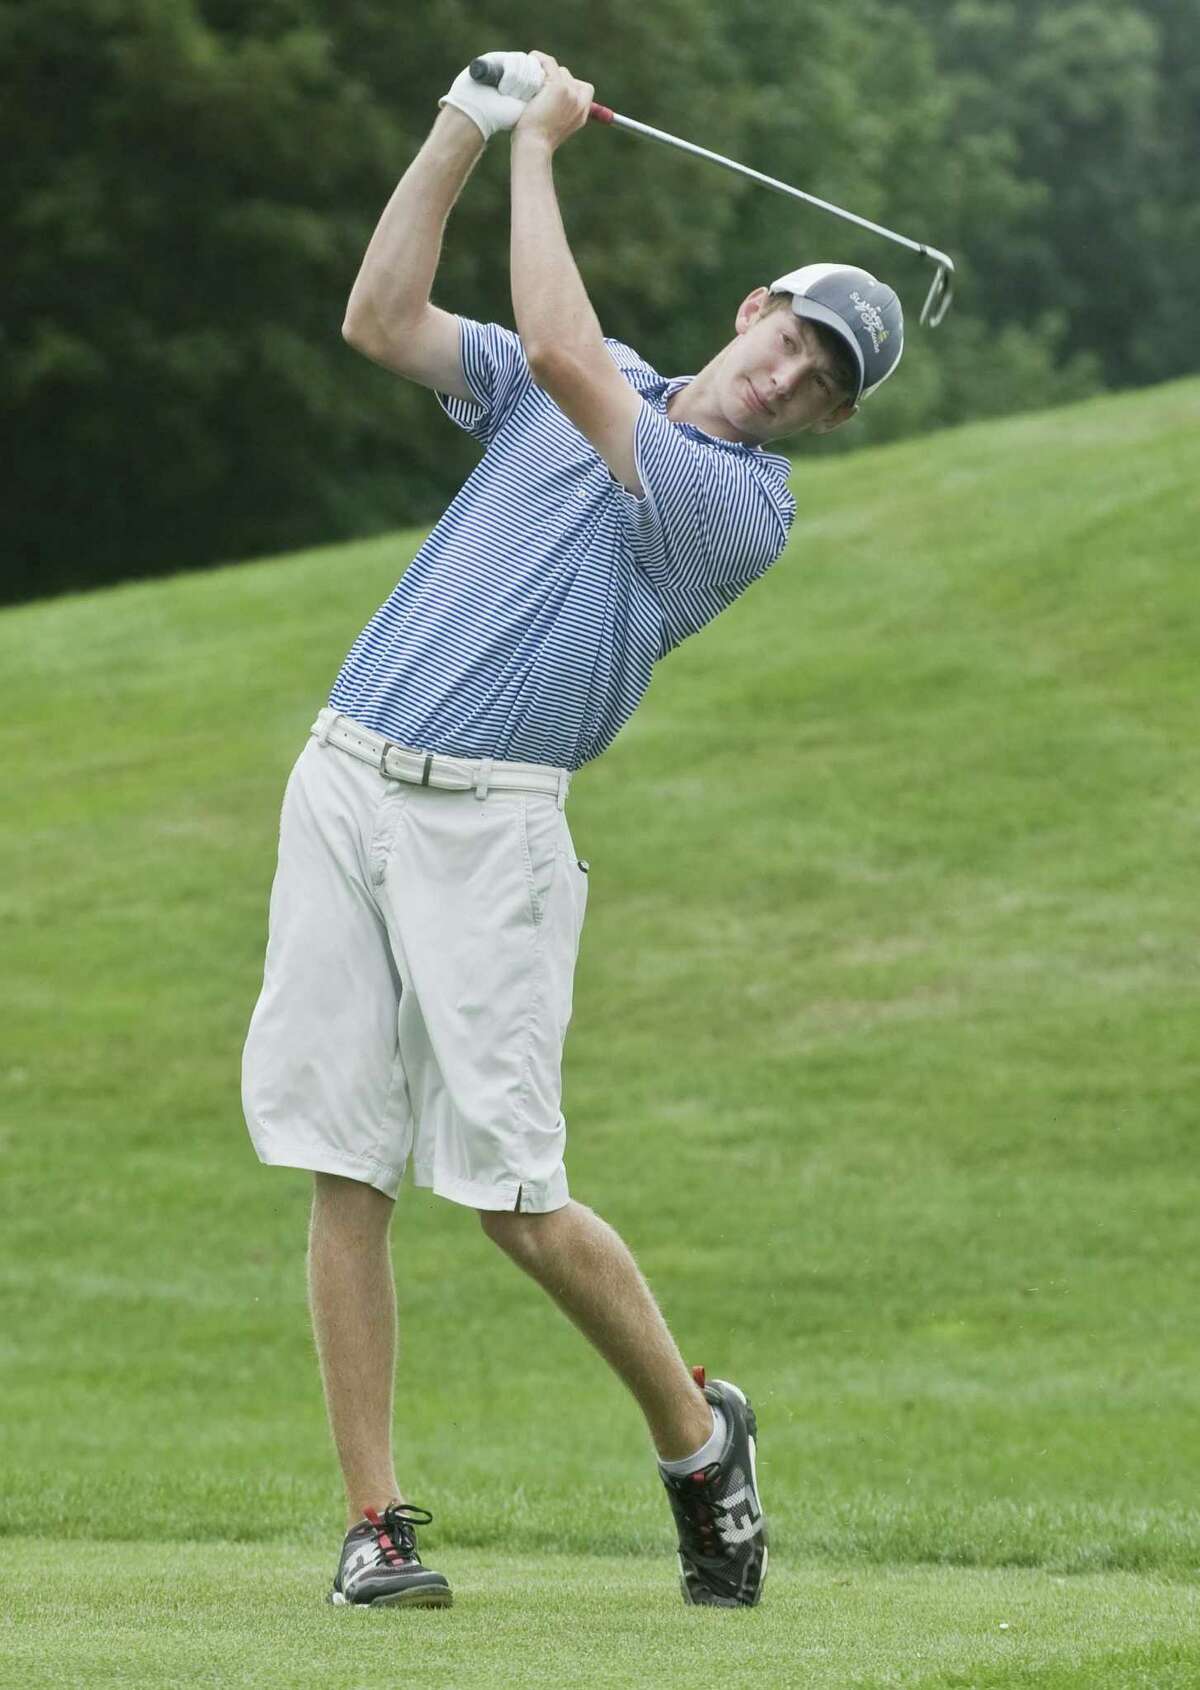 Spencer Olson watches his drive on the second day of the 27th Annual Danbury Amateur golf tournament at Richter Park. Sunday, July 23, 2017